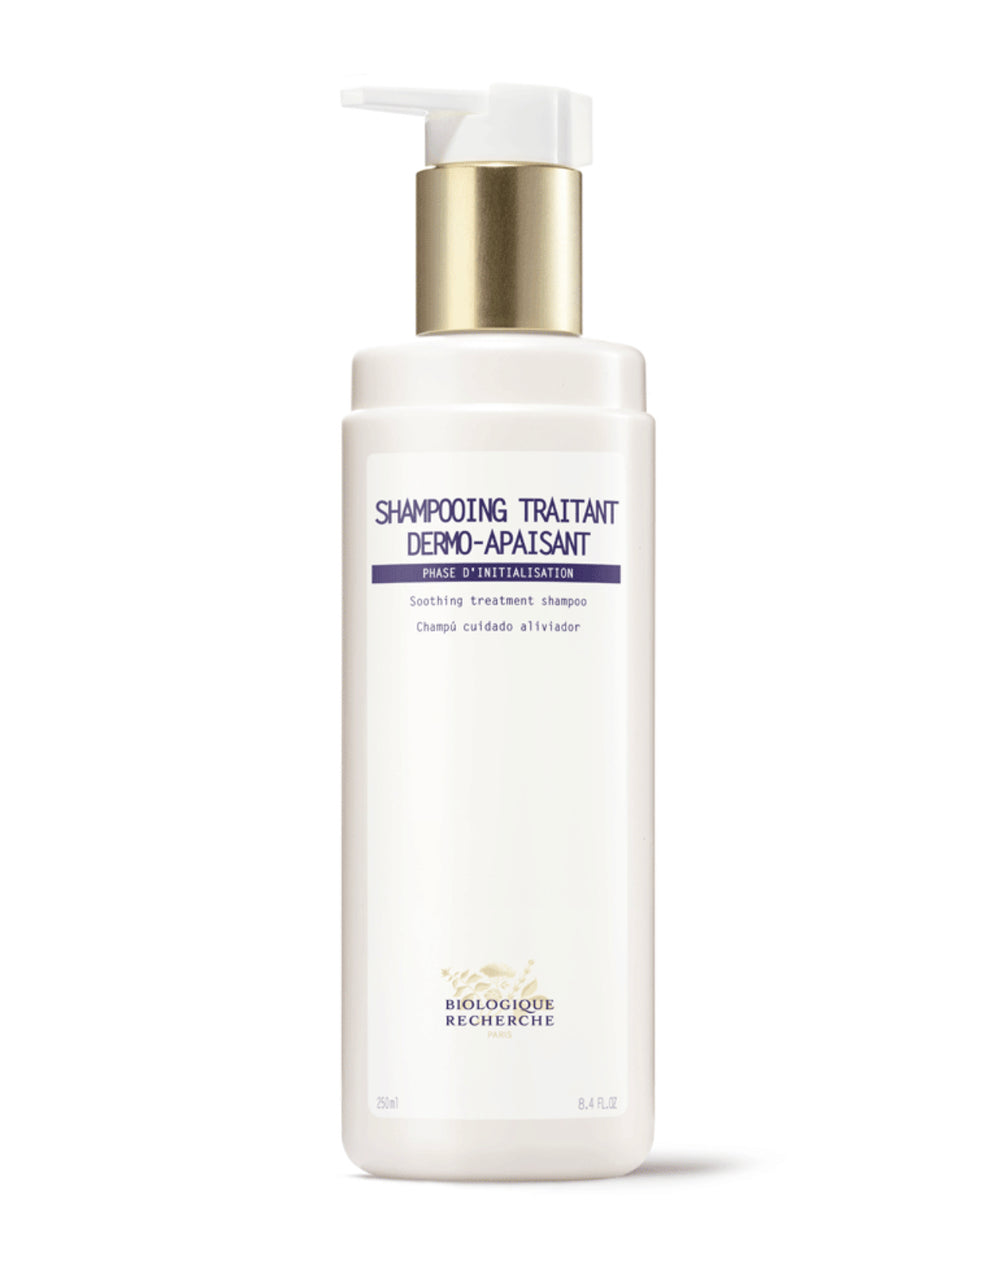 SHAMPOOING TRAITANT DERMO-APAISANT - Soothing treatment for hair and scalp